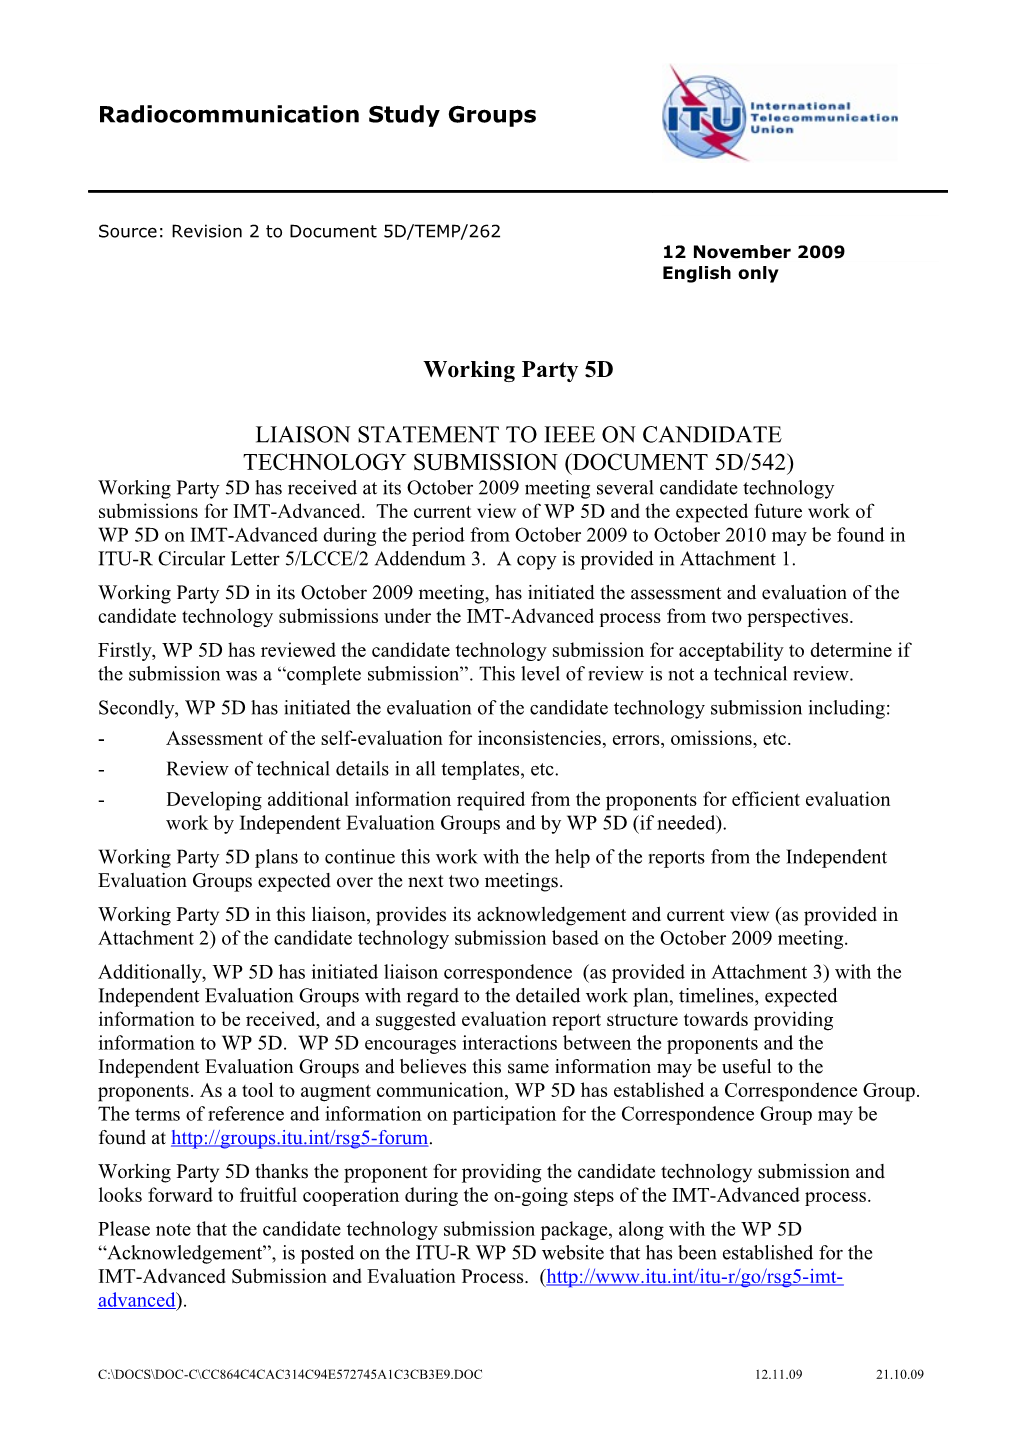 Draft Liaison Statement to Ieee on Candidate Technology Submission (Document 5D/542)